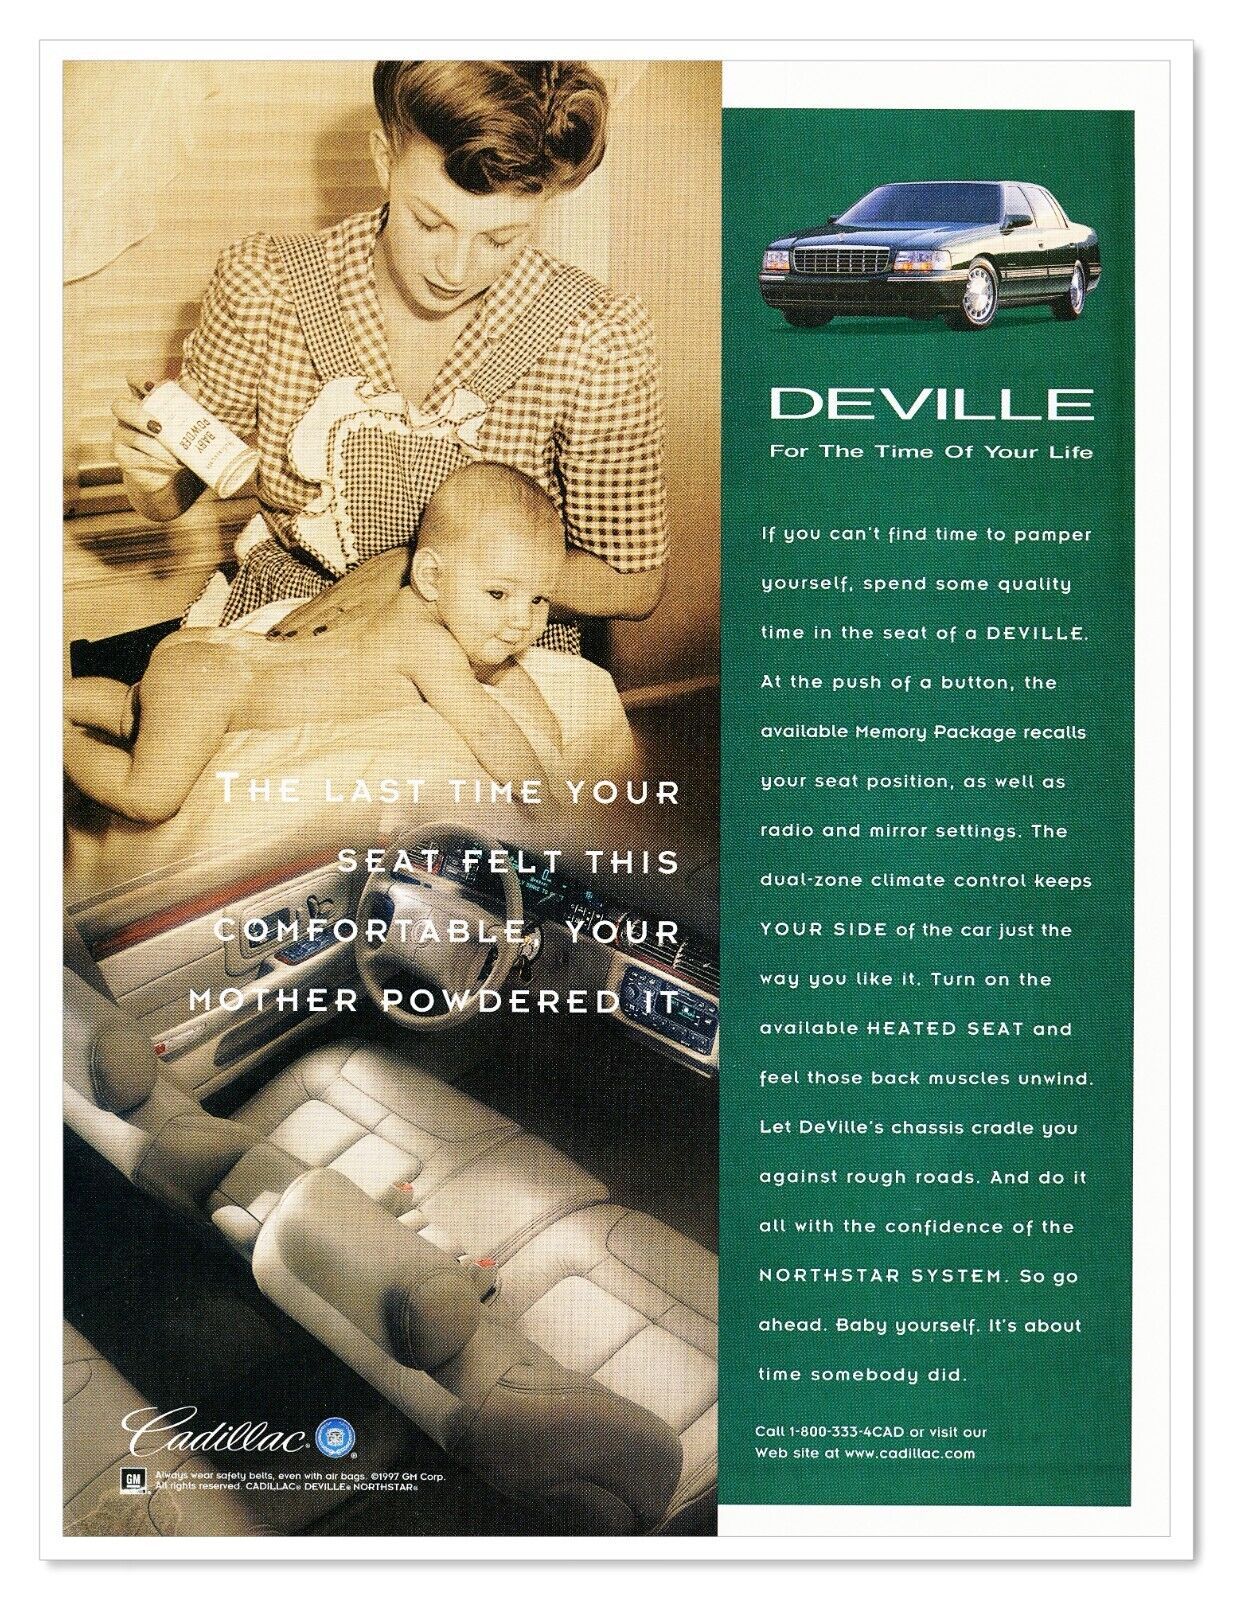 Cadillac Deville Mother Powdering Baby Vintage 1997 Full-Page Print Magazine Ad - $9.70